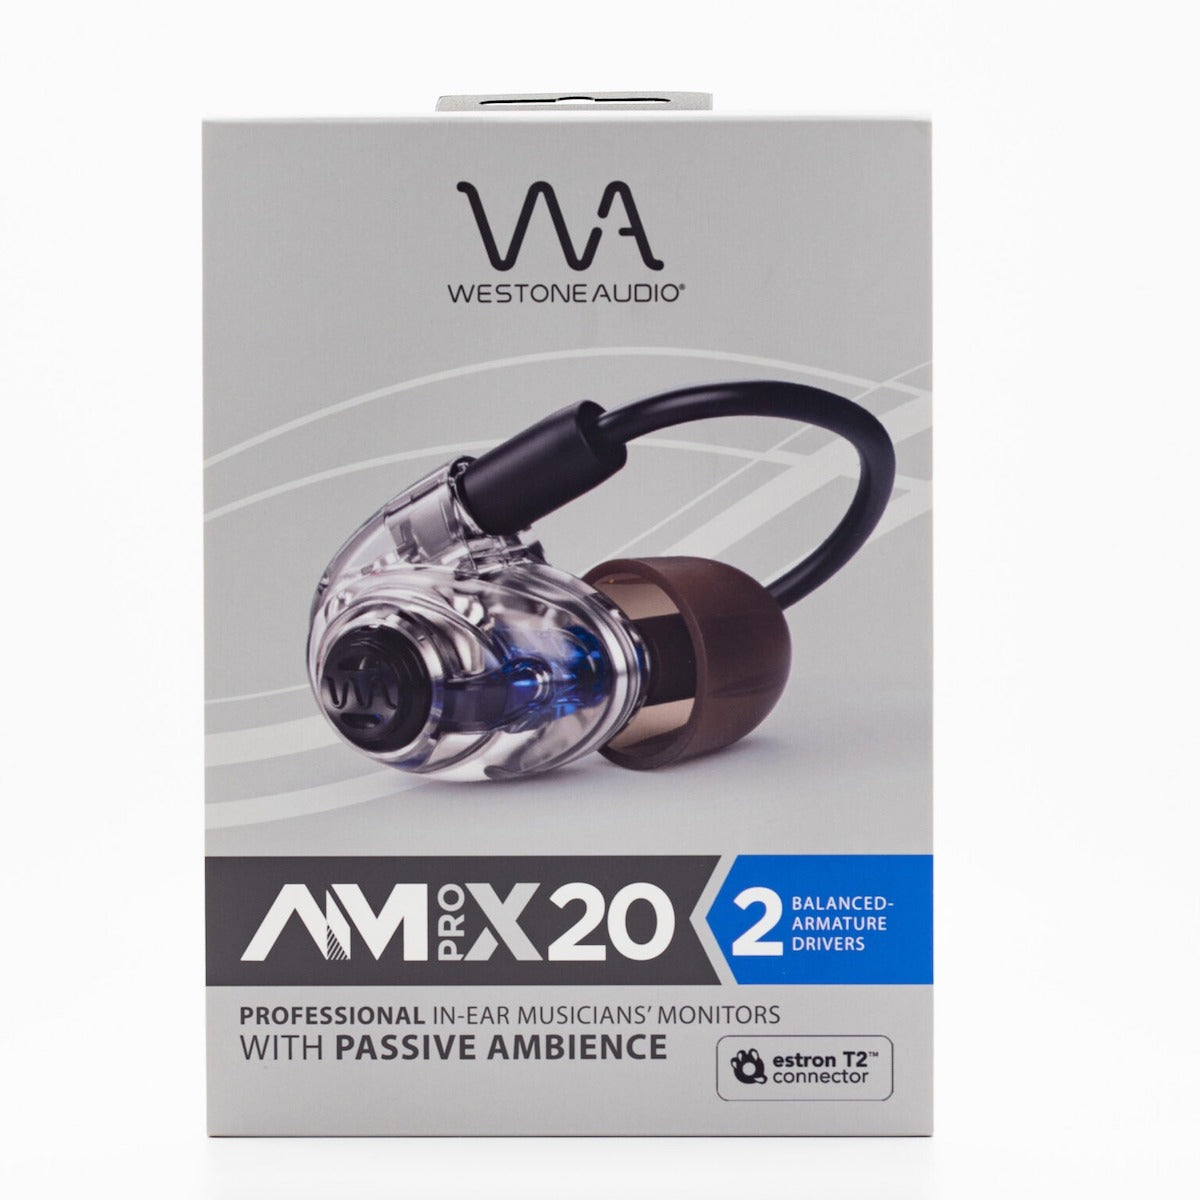 Westone AM Pro X20 - Dual-Driver Musician IEM with Passive Ambience, retail box front